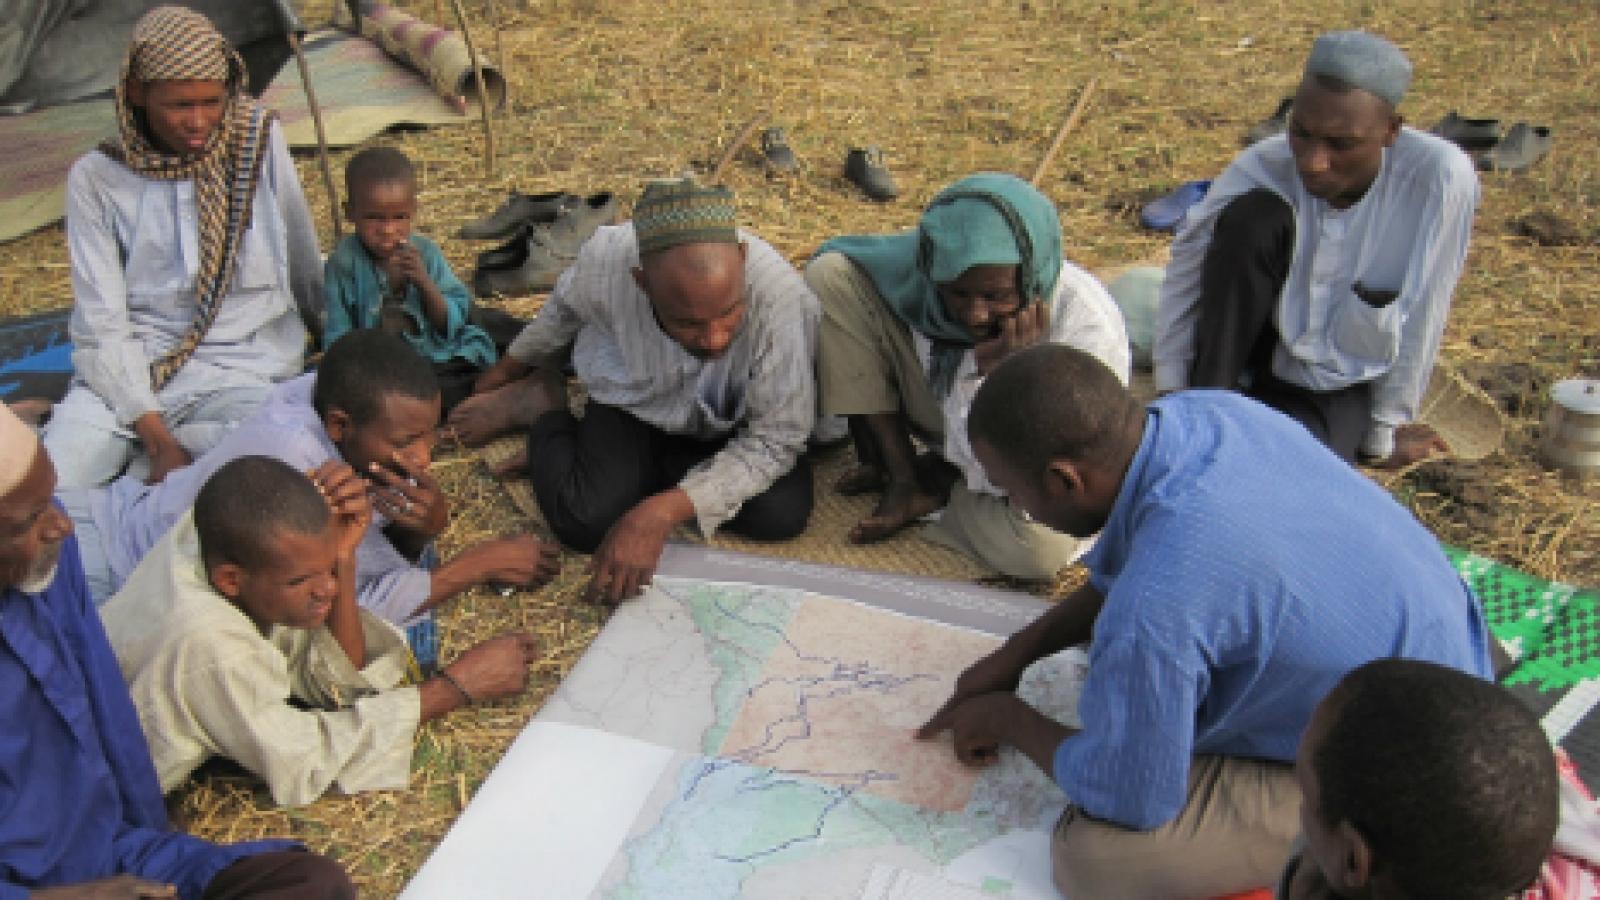 Sharing preliminary results with pastoralists